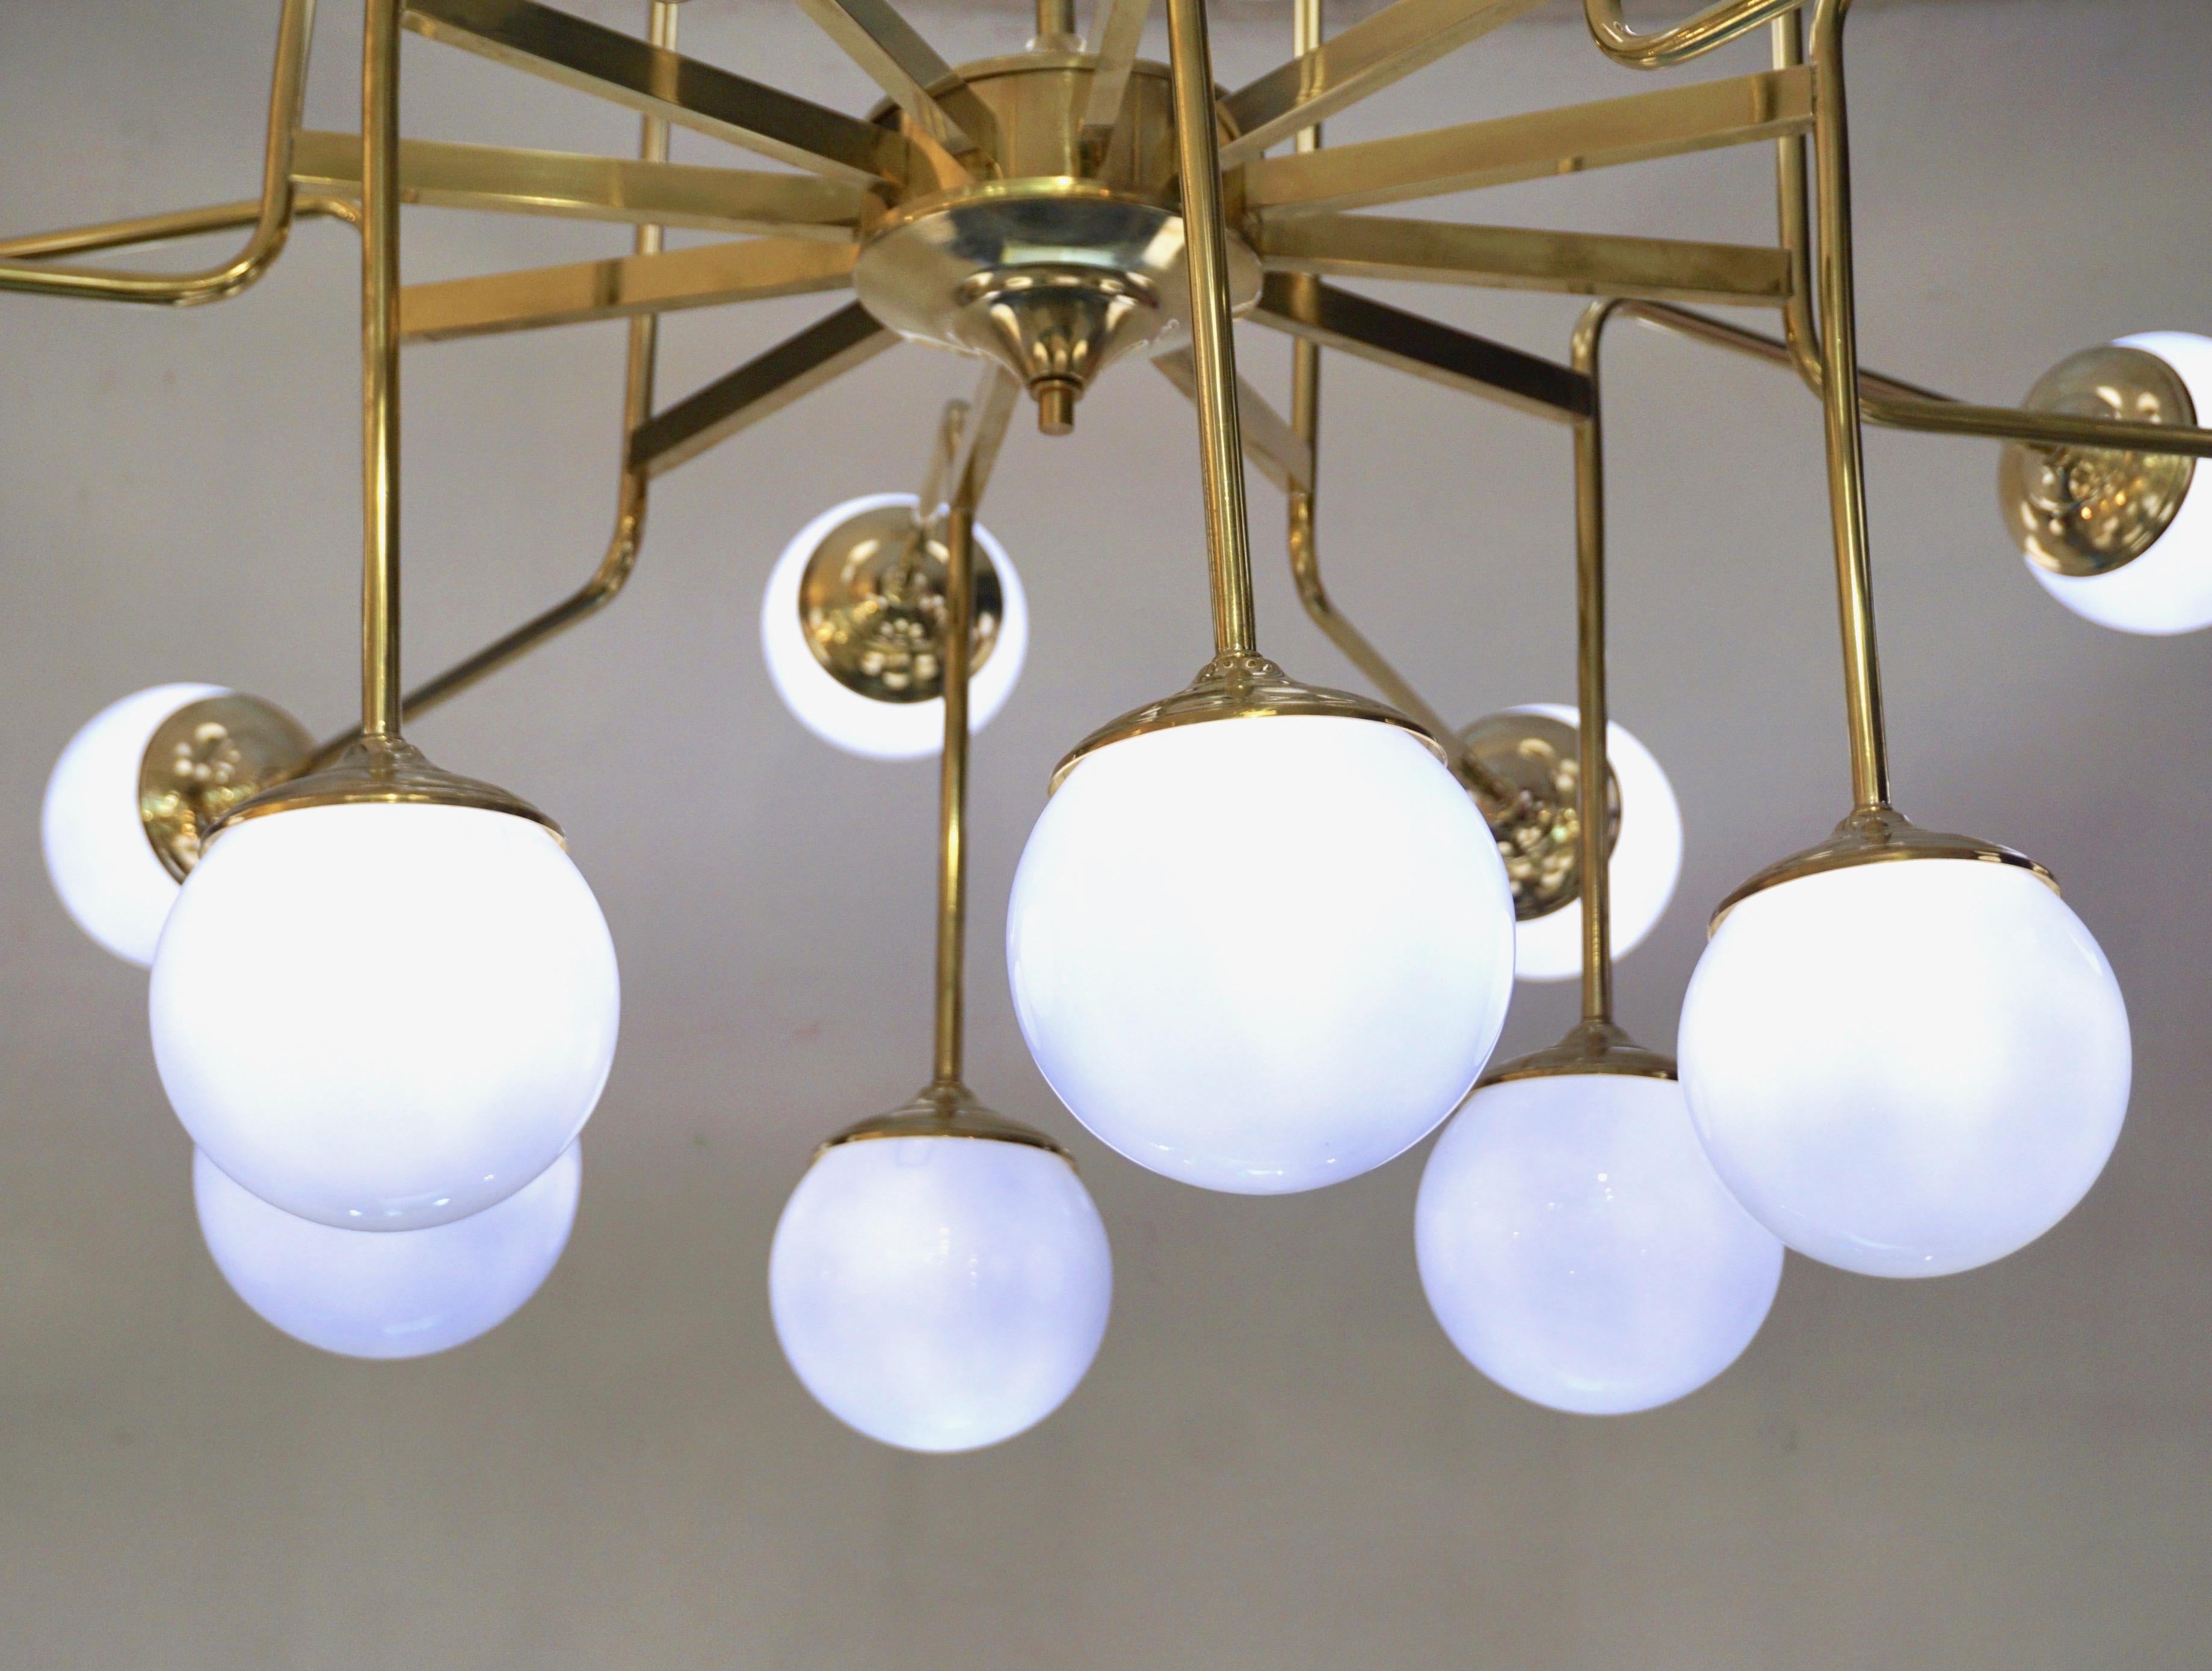 Italian Modern 24-Light Brass and Lavender Periwinkle Murano Glass Chandelier In New Condition For Sale In New York, NY